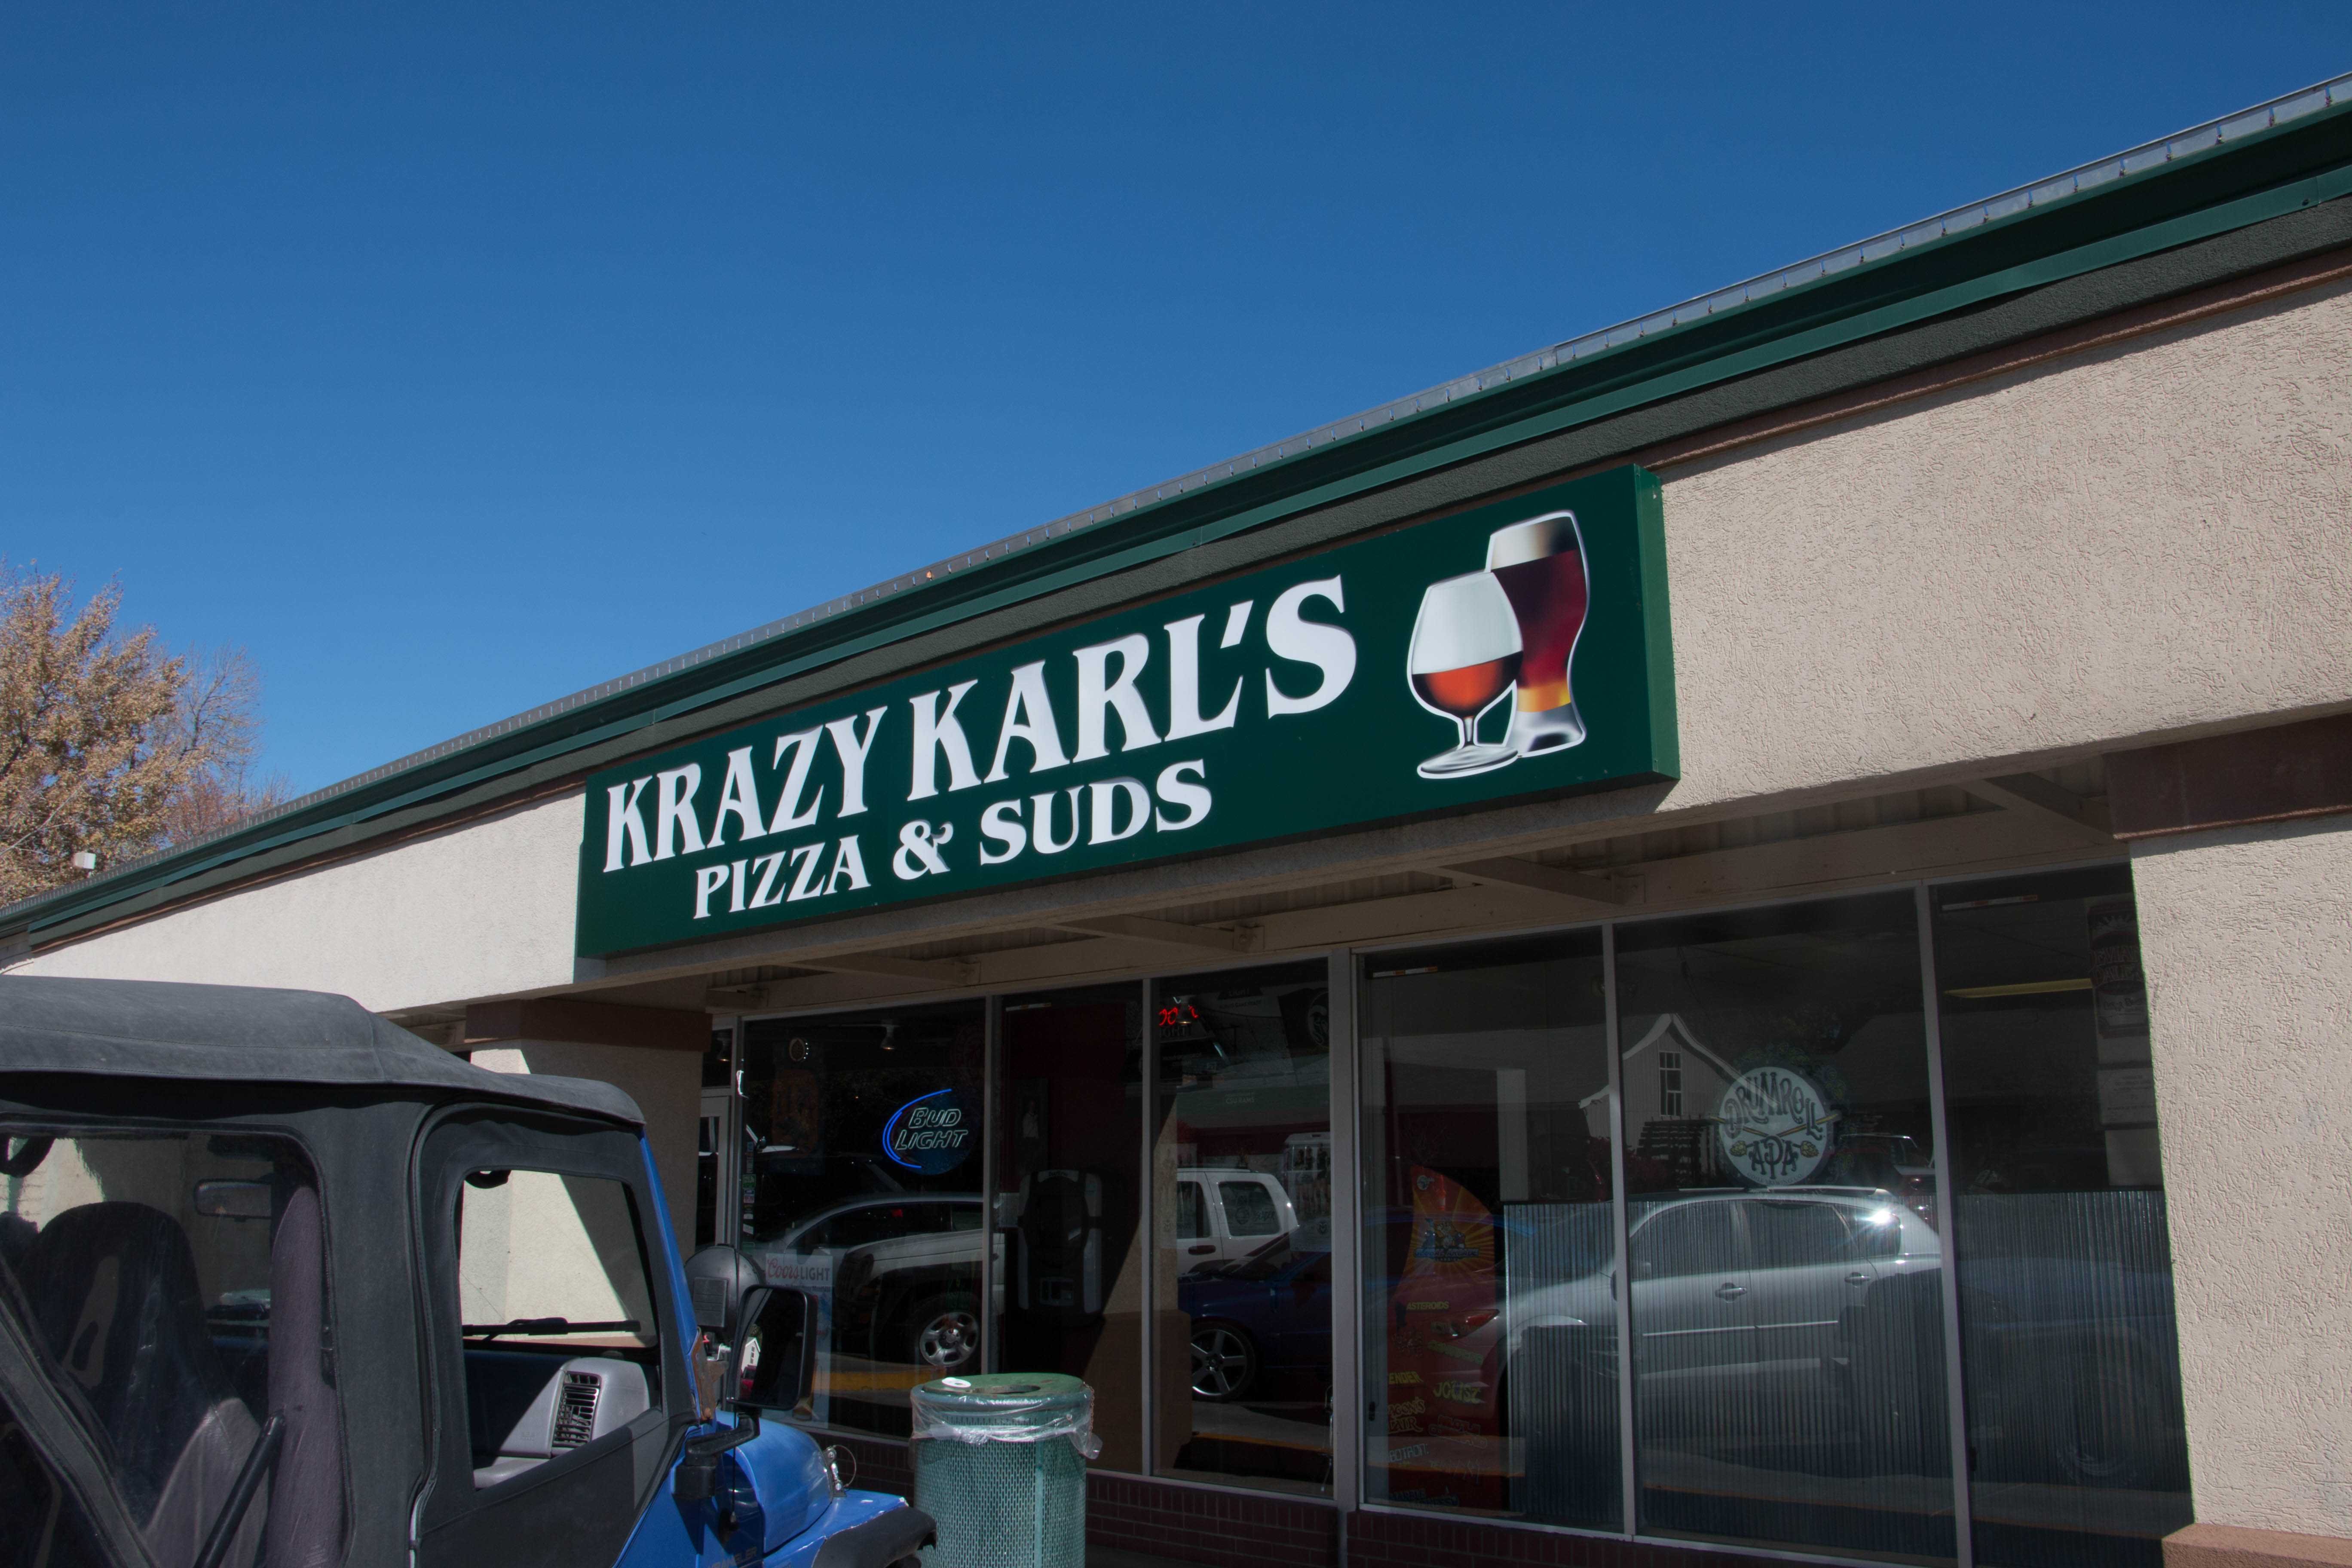 The sign at Krazy Karl's Pizza